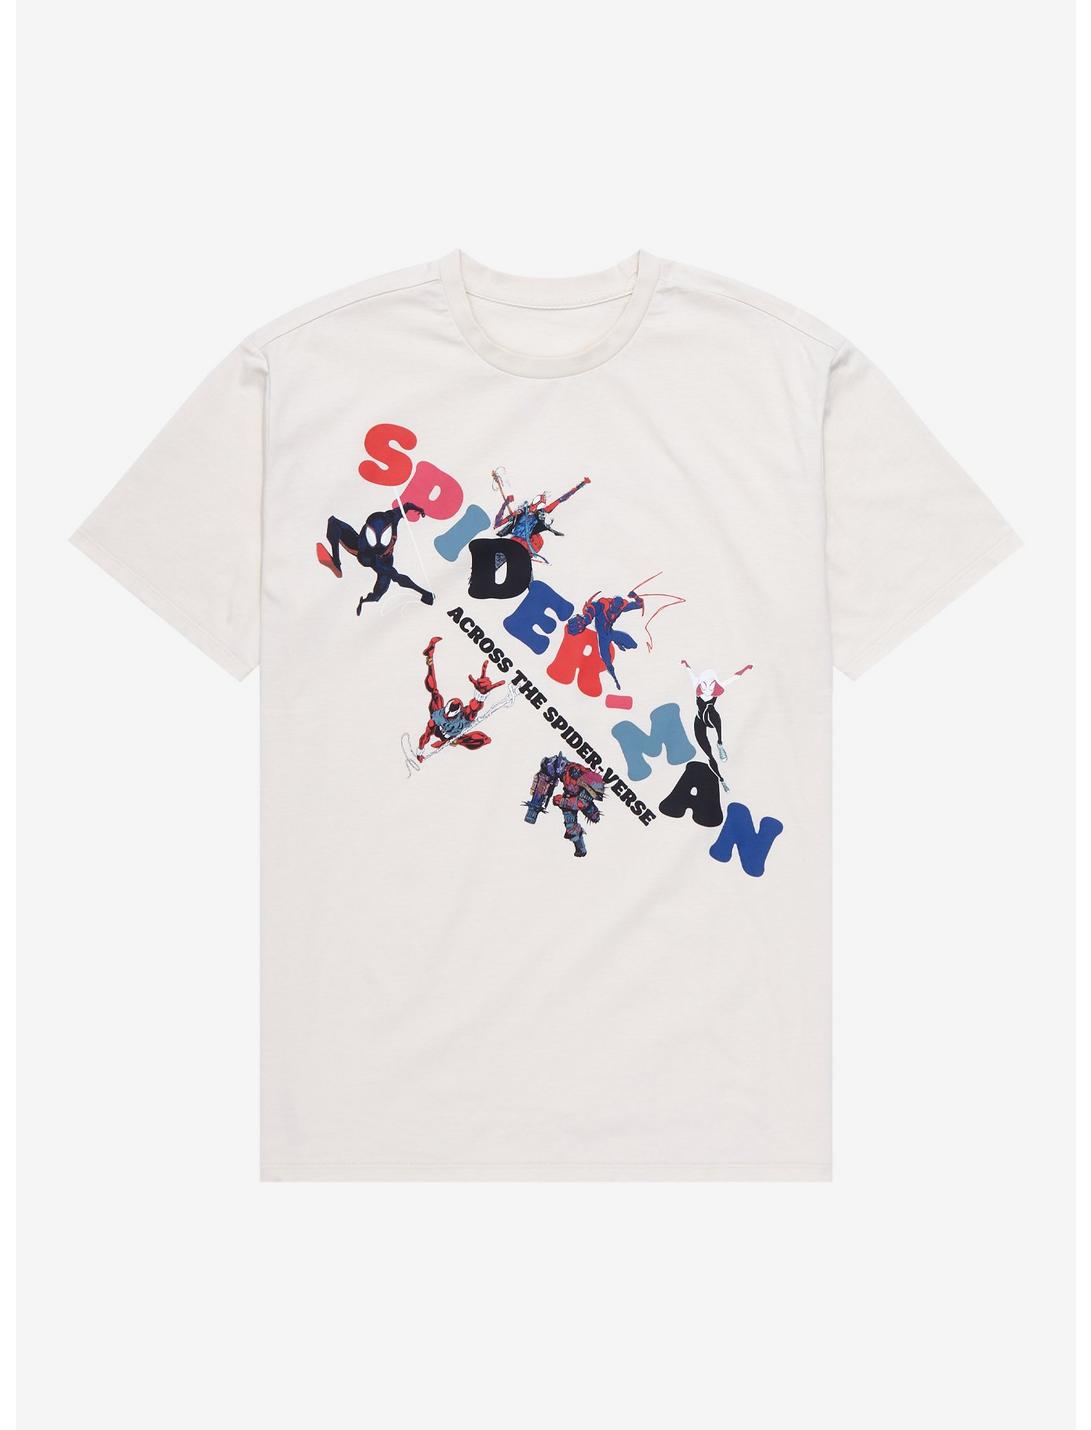 Marvel Spider-Man Across the Spider-Verse Group Portrait T-Shirt - BoxLunch Exclusive , LIGHT GREY, hi-res